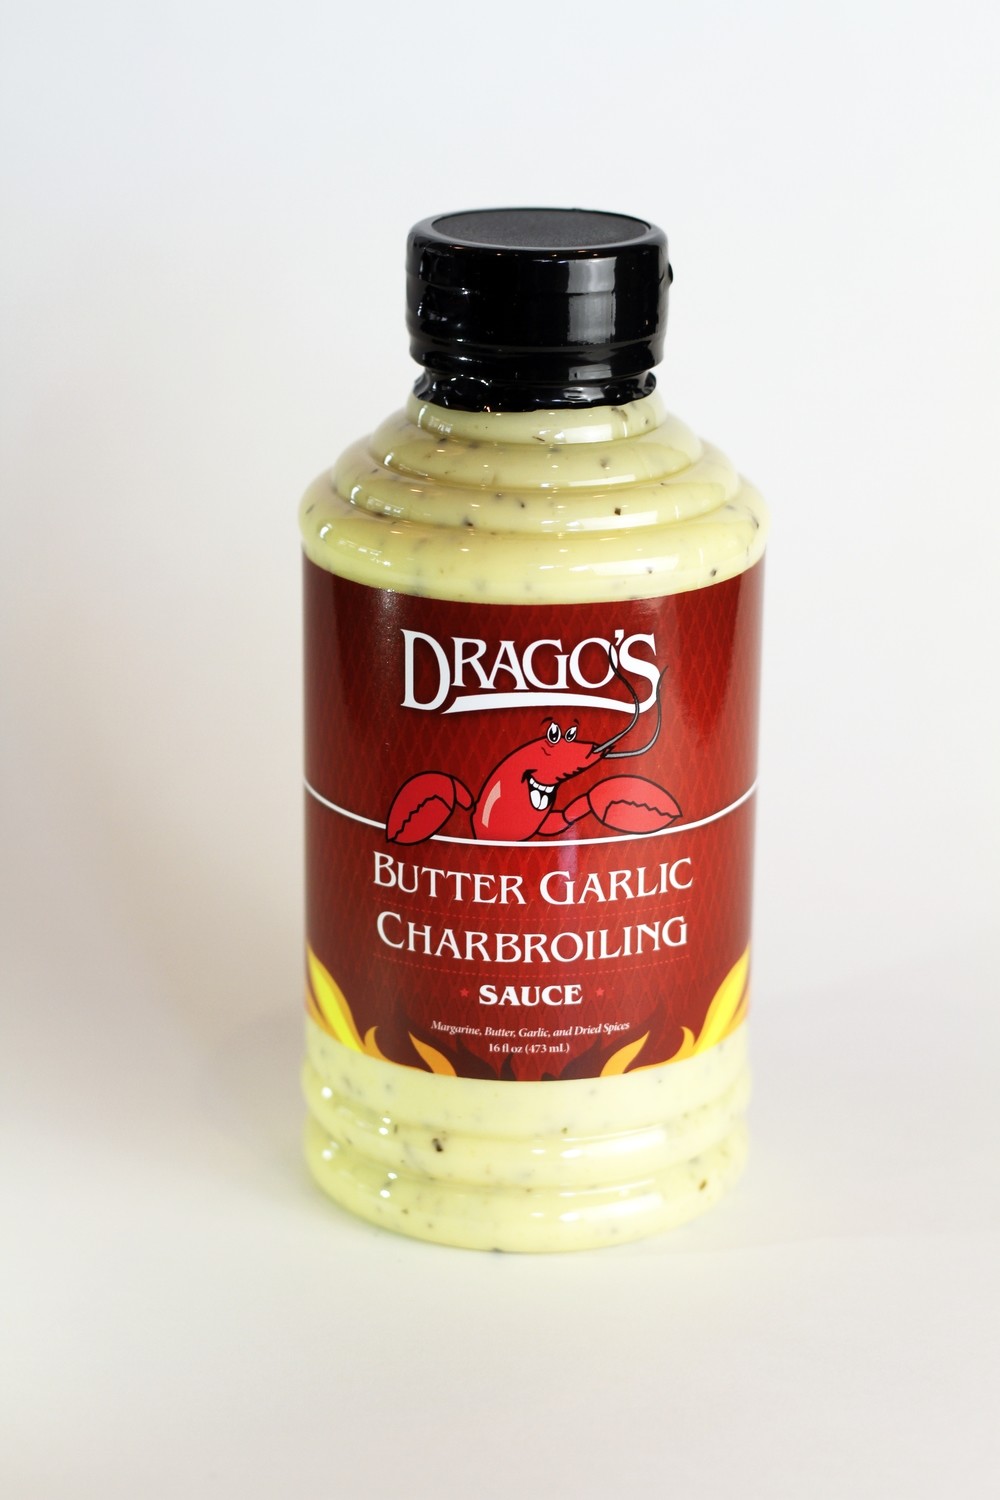 Drago's Butter Garlic Charbroiling Sauce - 3 Pack